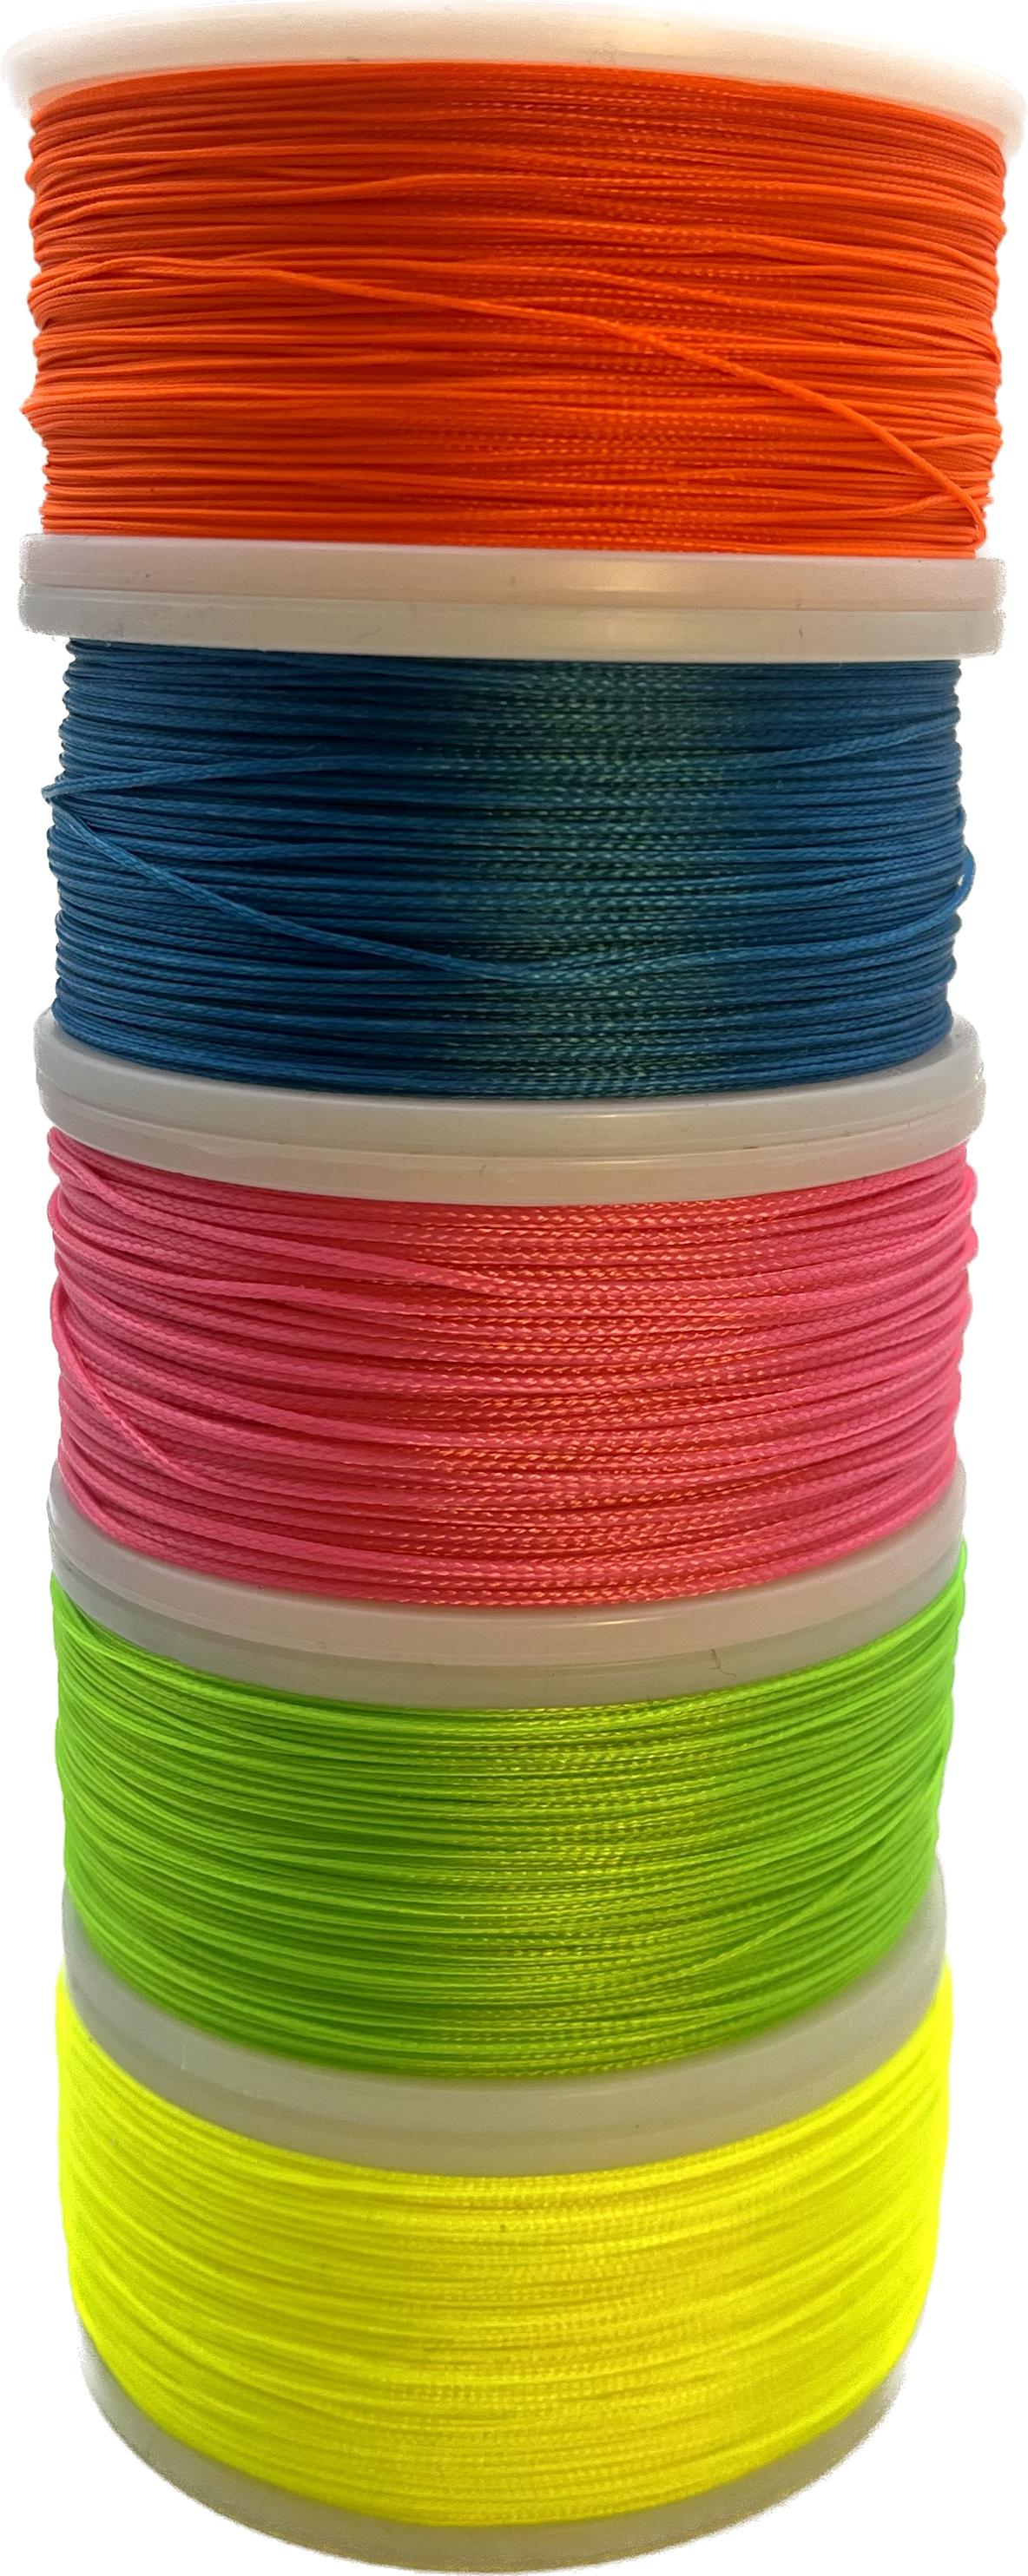 Woodstock Braided Dacron Fishing Line Deep Water White 130lb-600yd USA Ship  for sale online